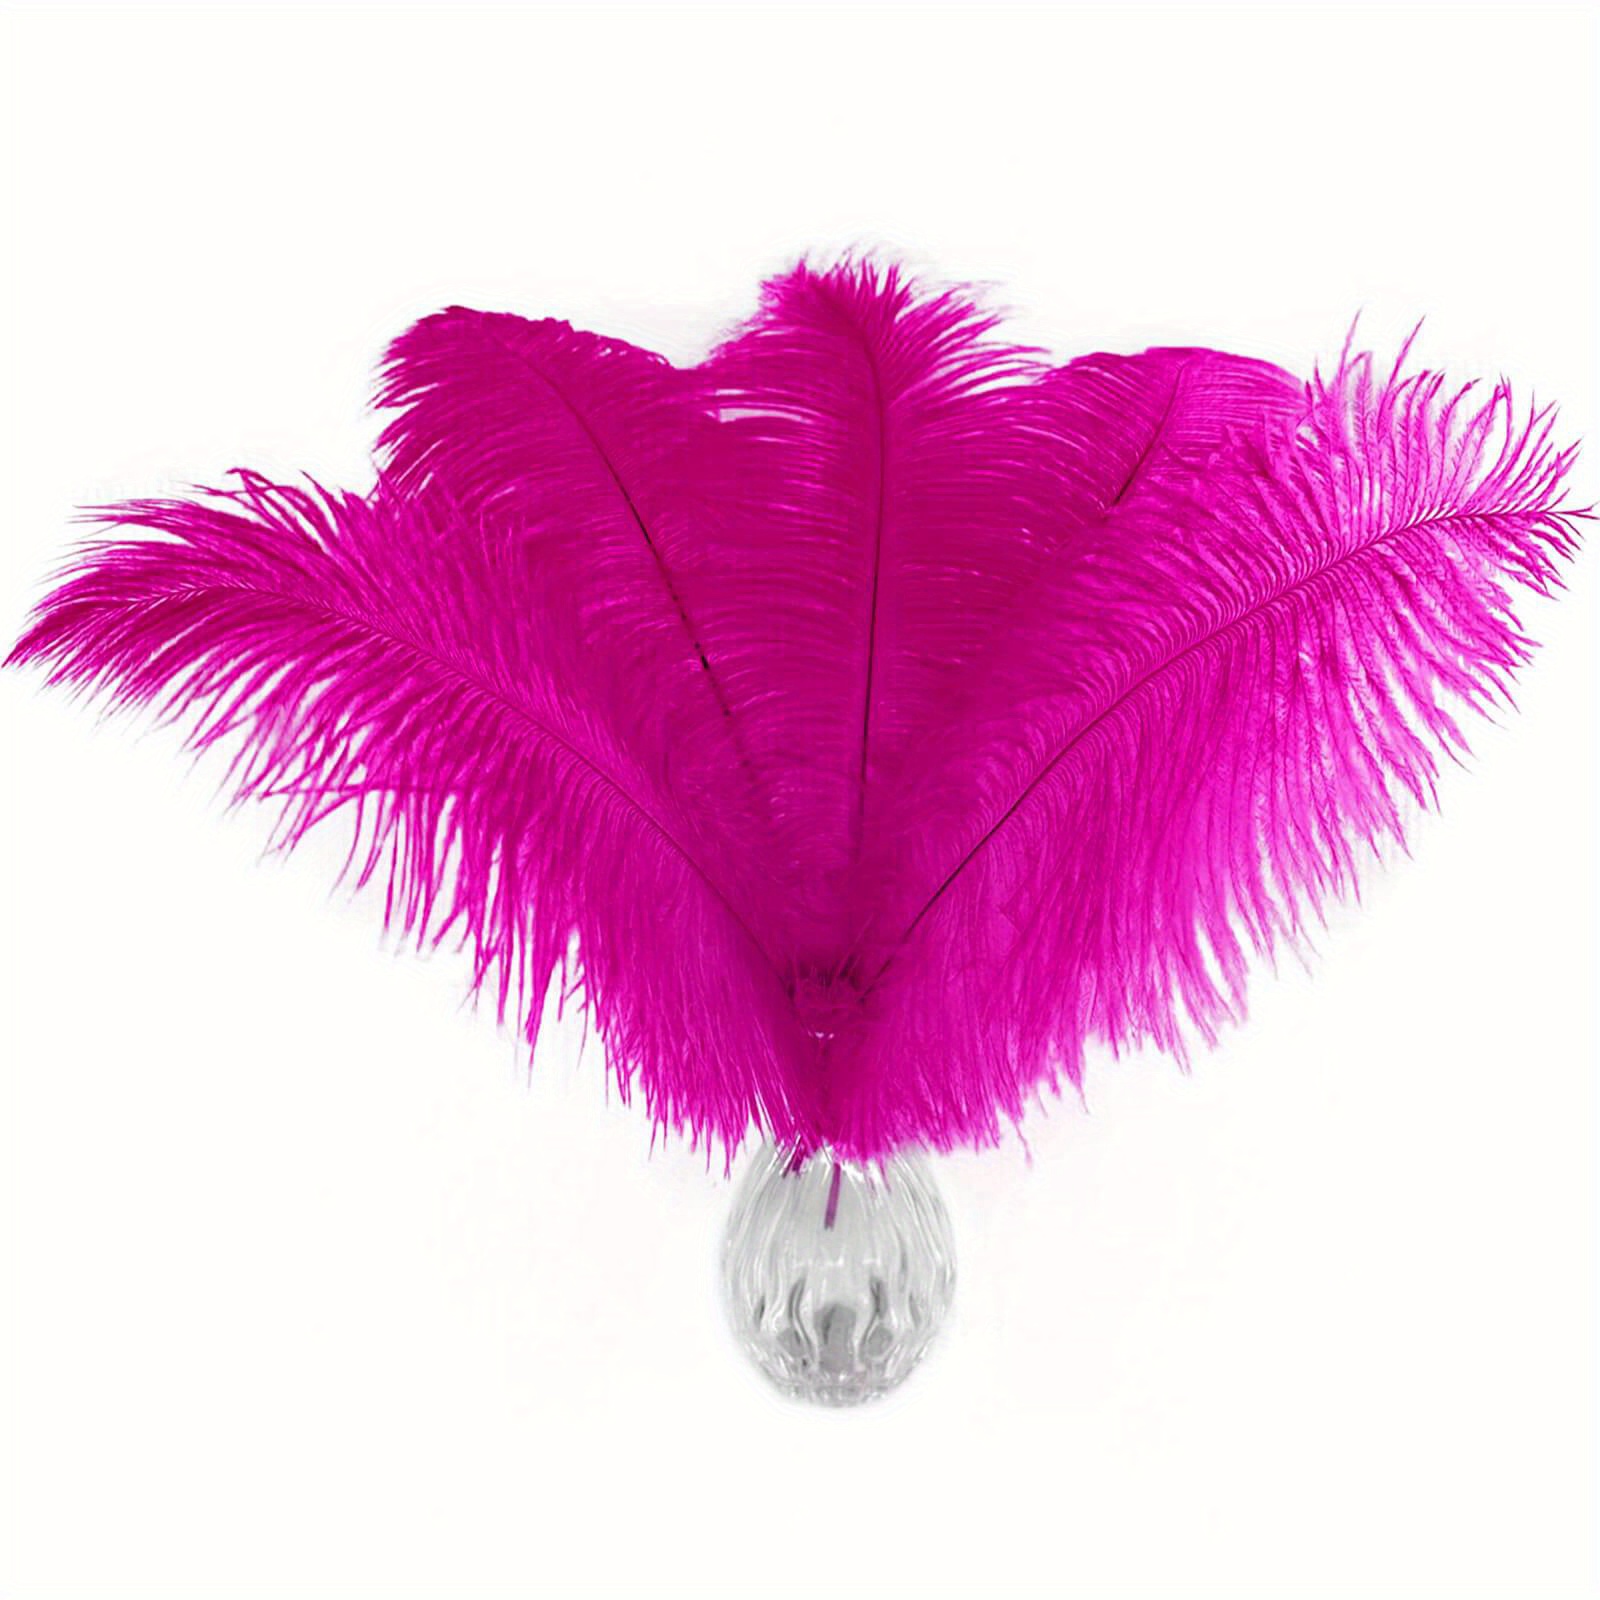 Hot Pink Ostrich Feather - 10-12